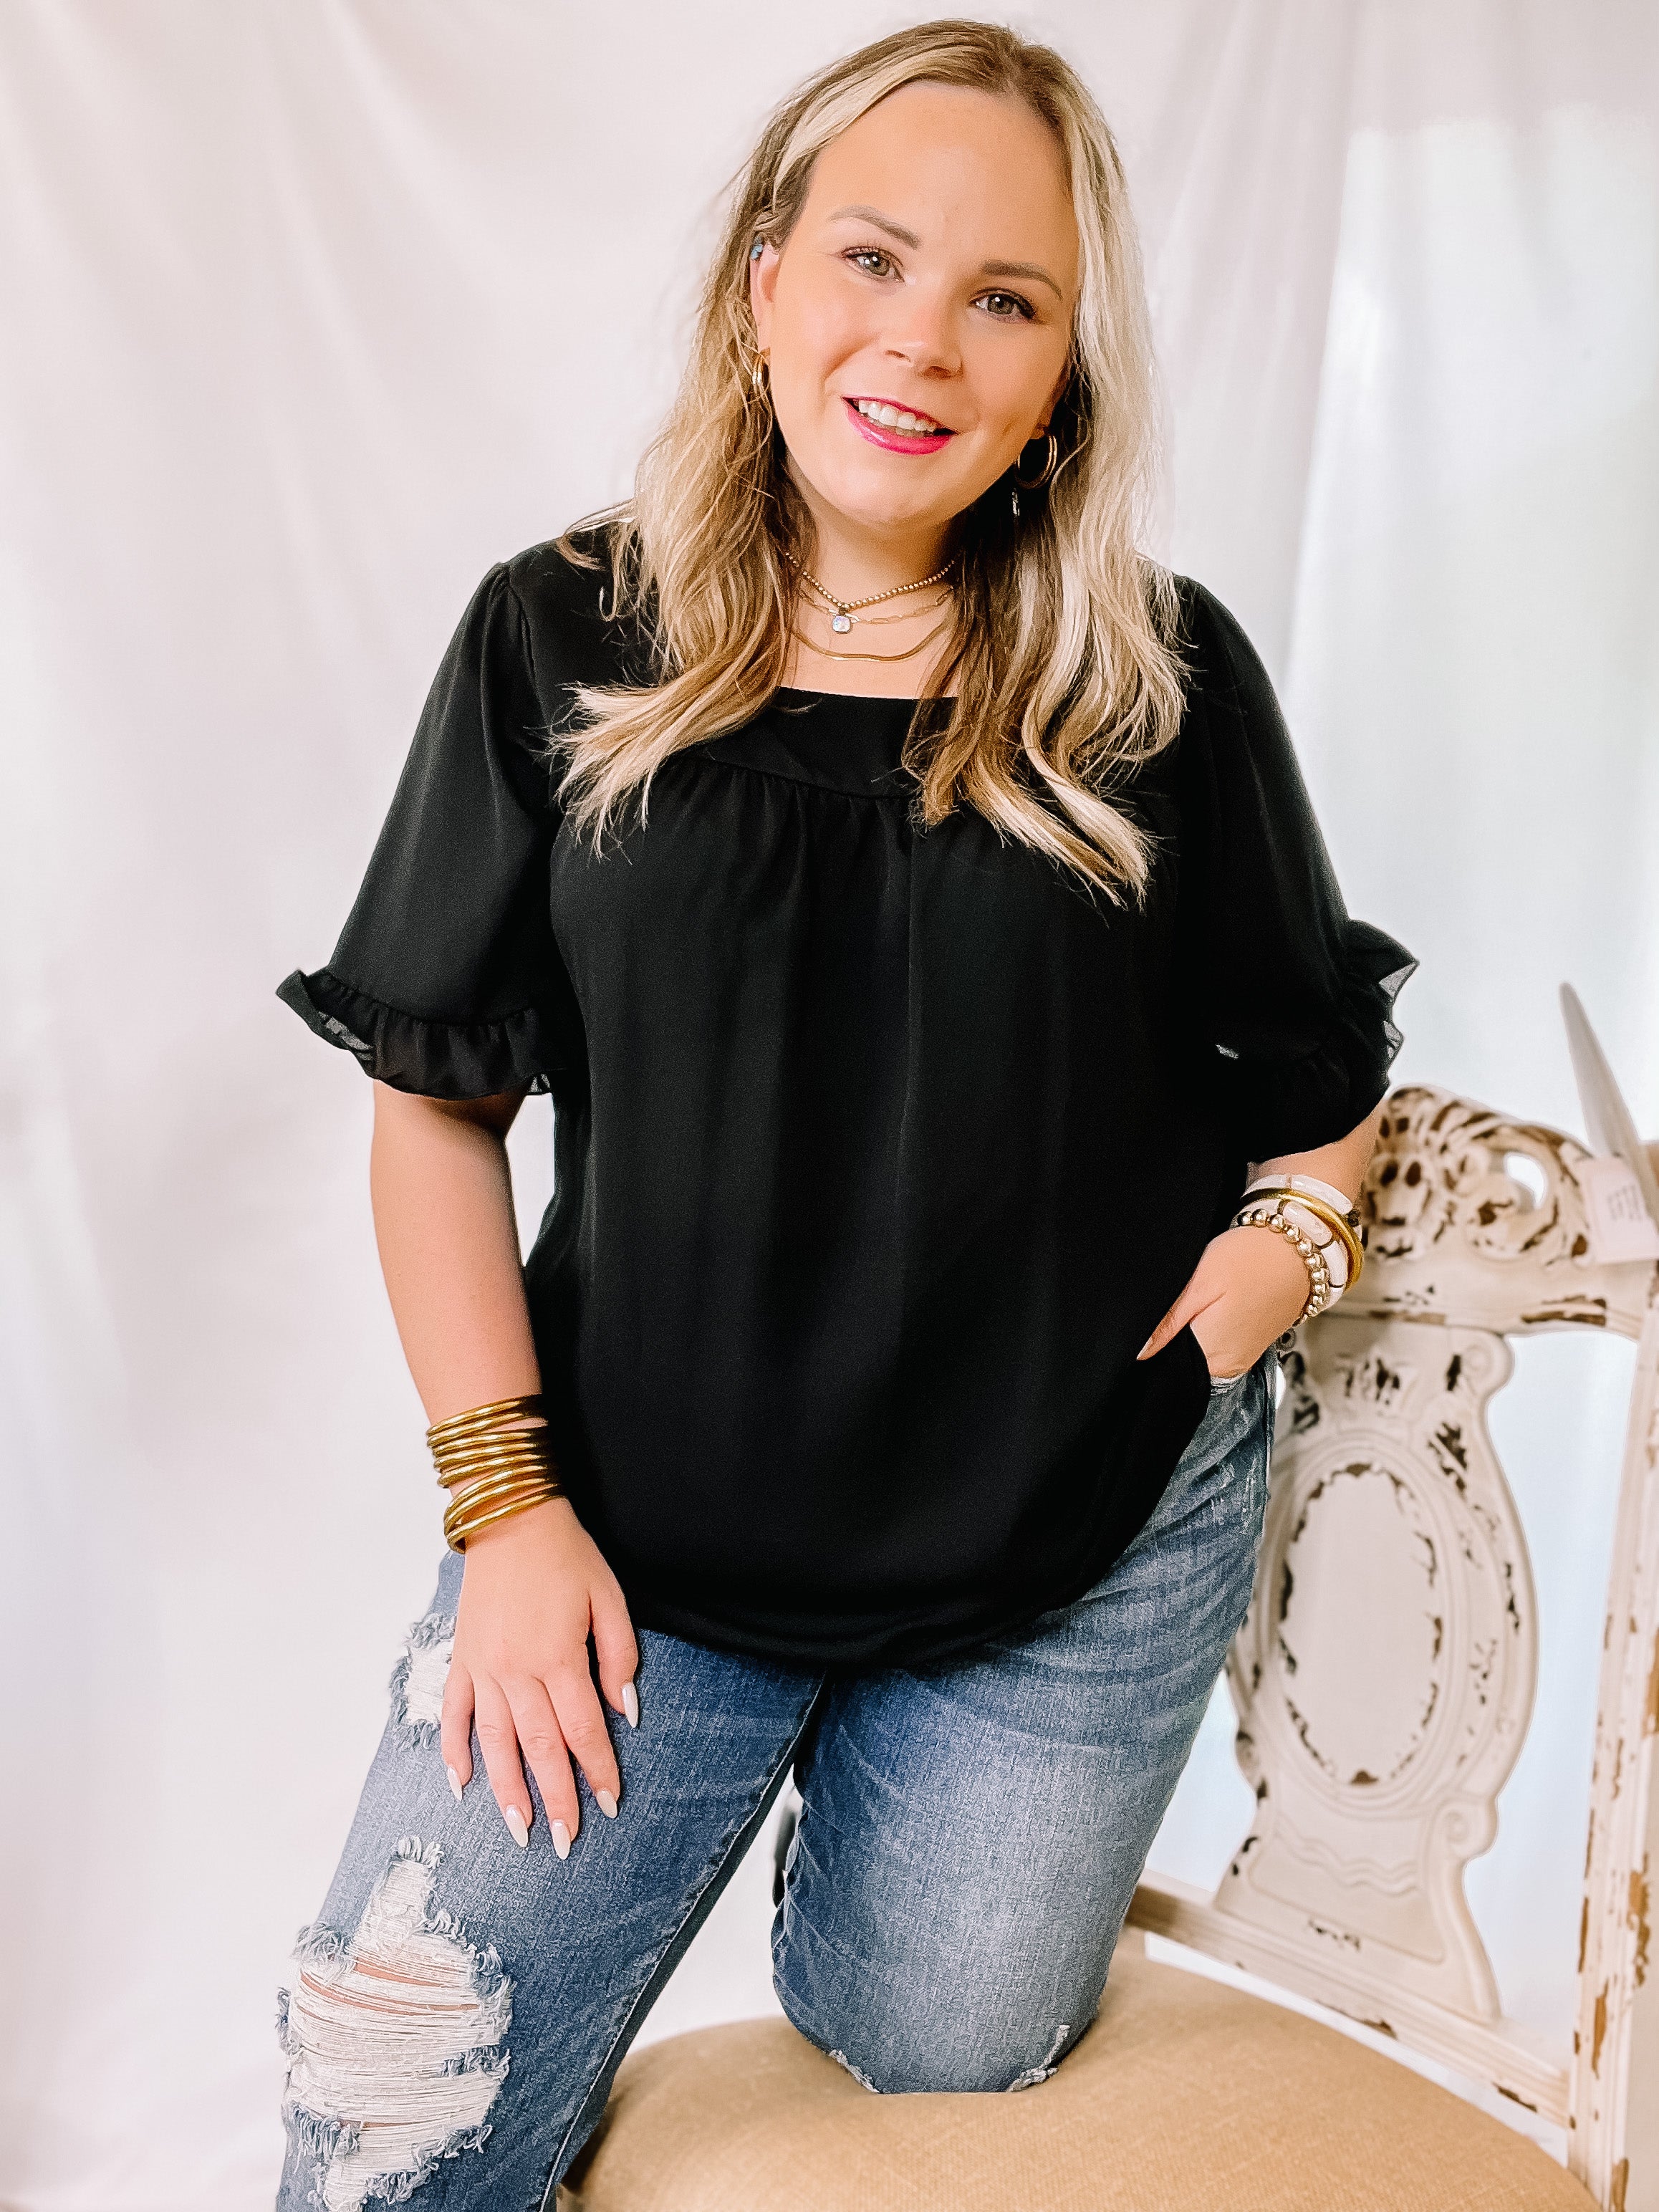 New Best Friend Square Neck Ruffle Short Sleeve Top in Black - Giddy Up Glamour Boutique